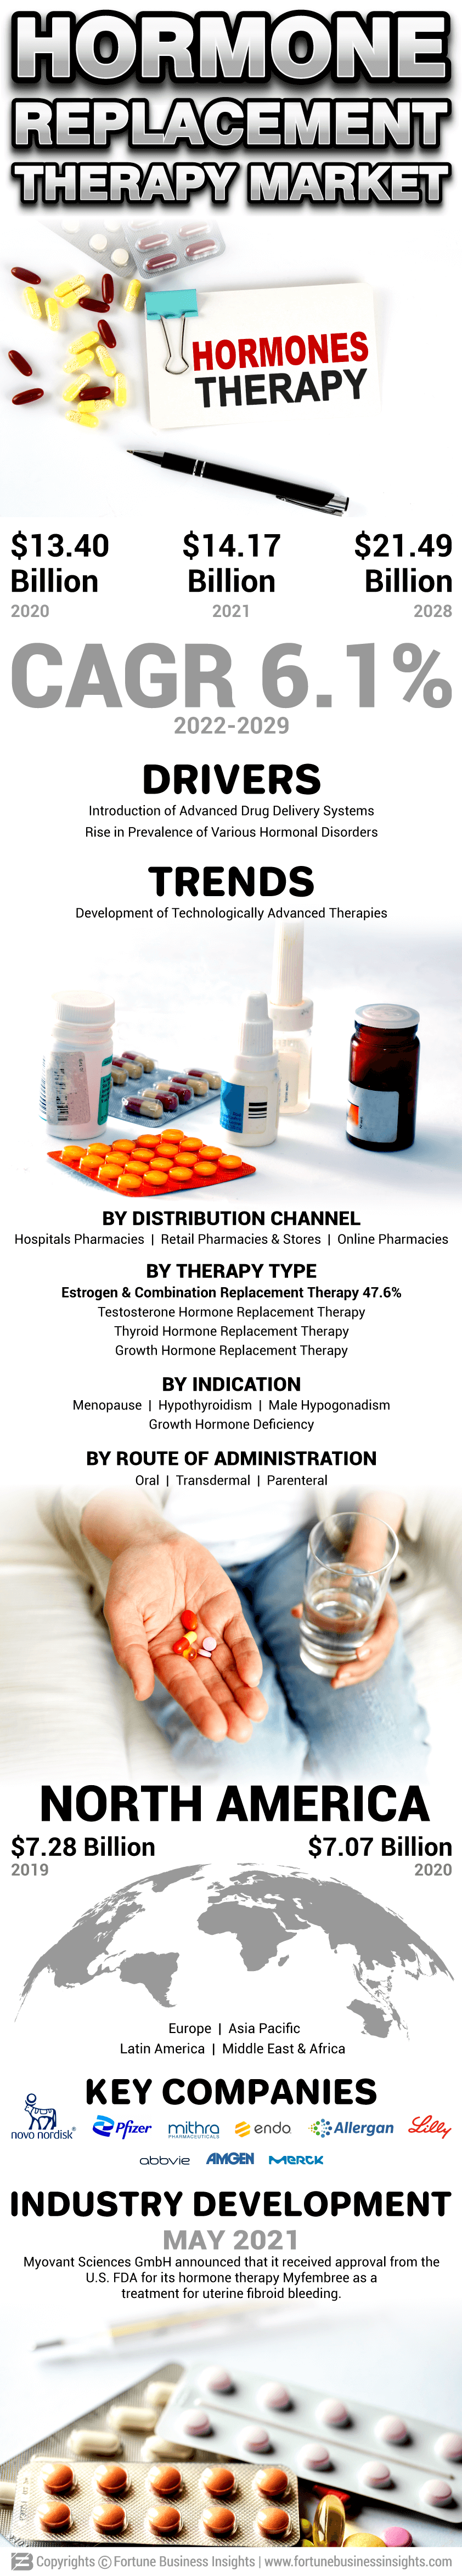 Hormone Replacement Therapy (HRT) Market